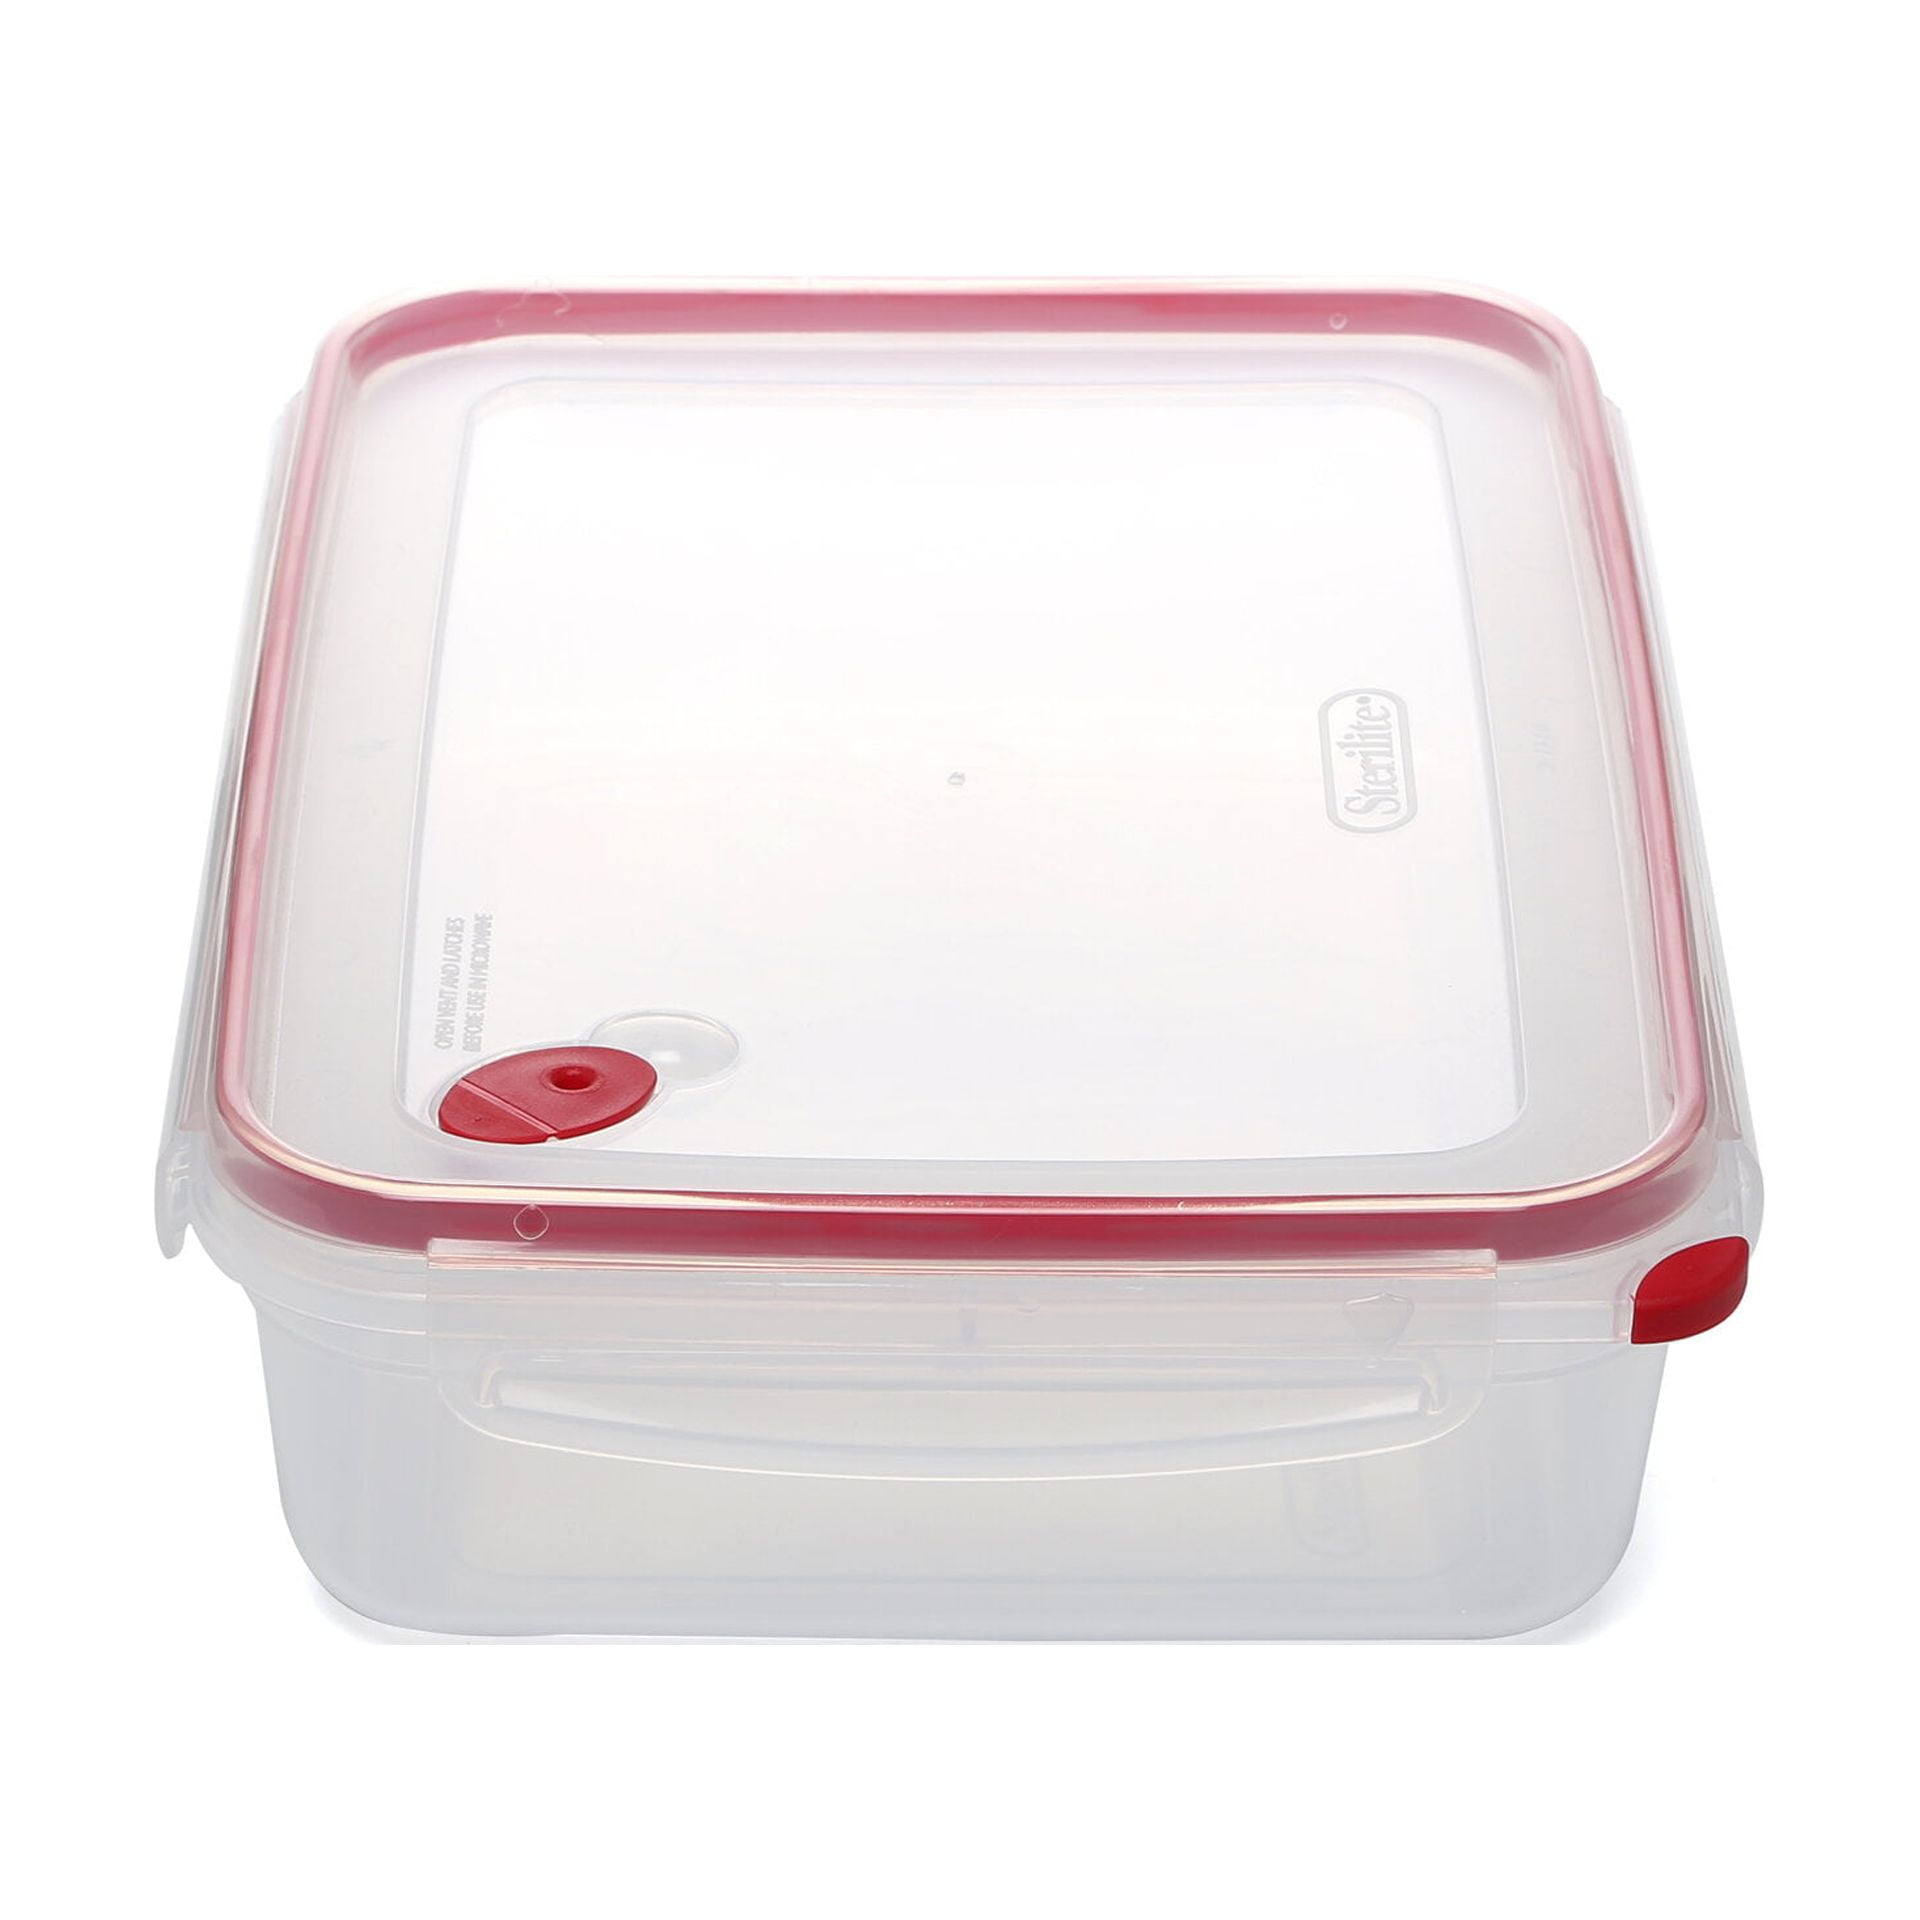 Sterilite 16 Cup Rectangle UltraSeal Food Storage Container, Red (8-Pack)